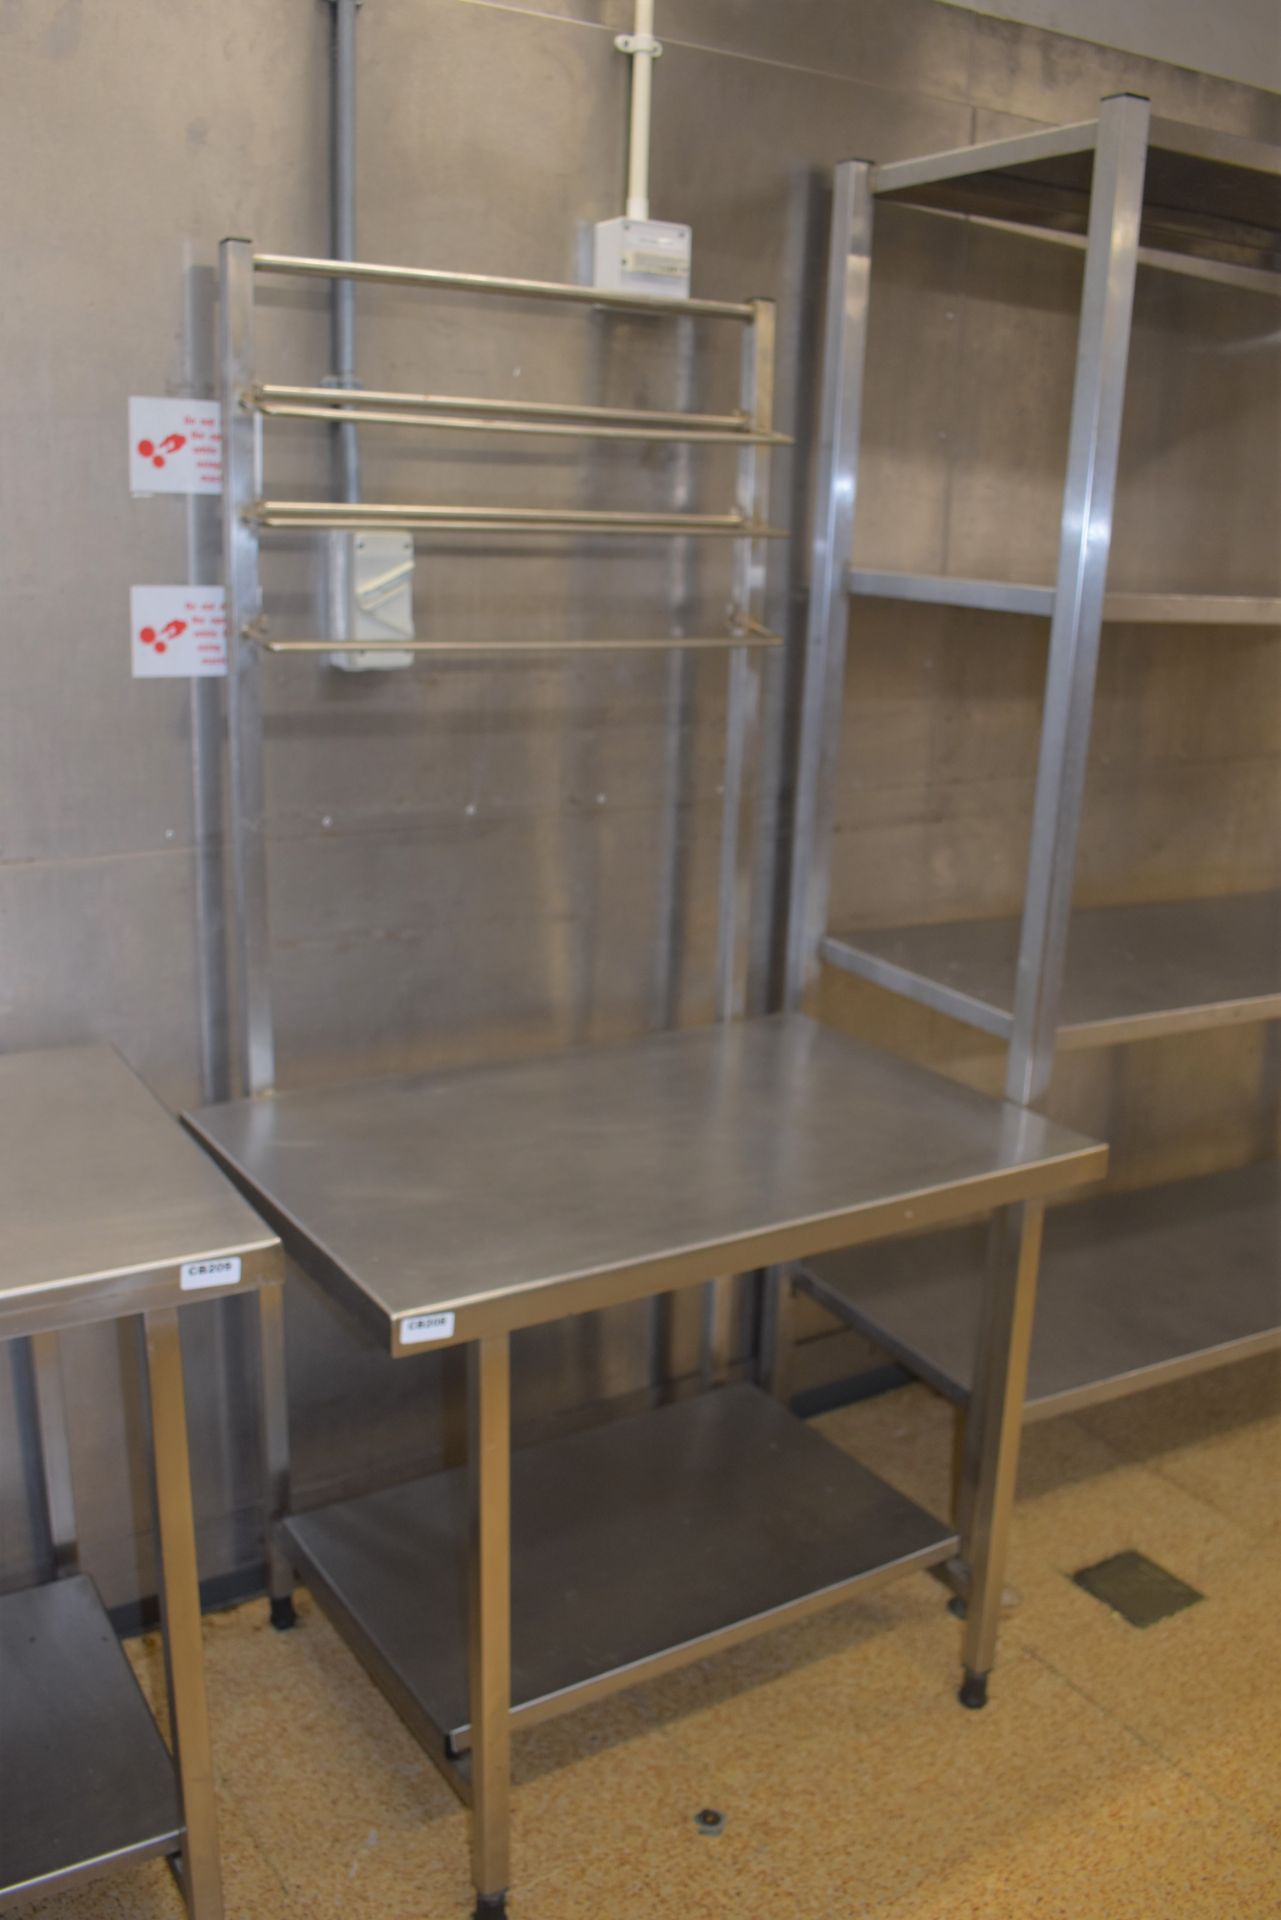 1 x Stainless Steel Prep Table With Overhead Utensil Hanging Rails and Undershelf - H76 / 175 x